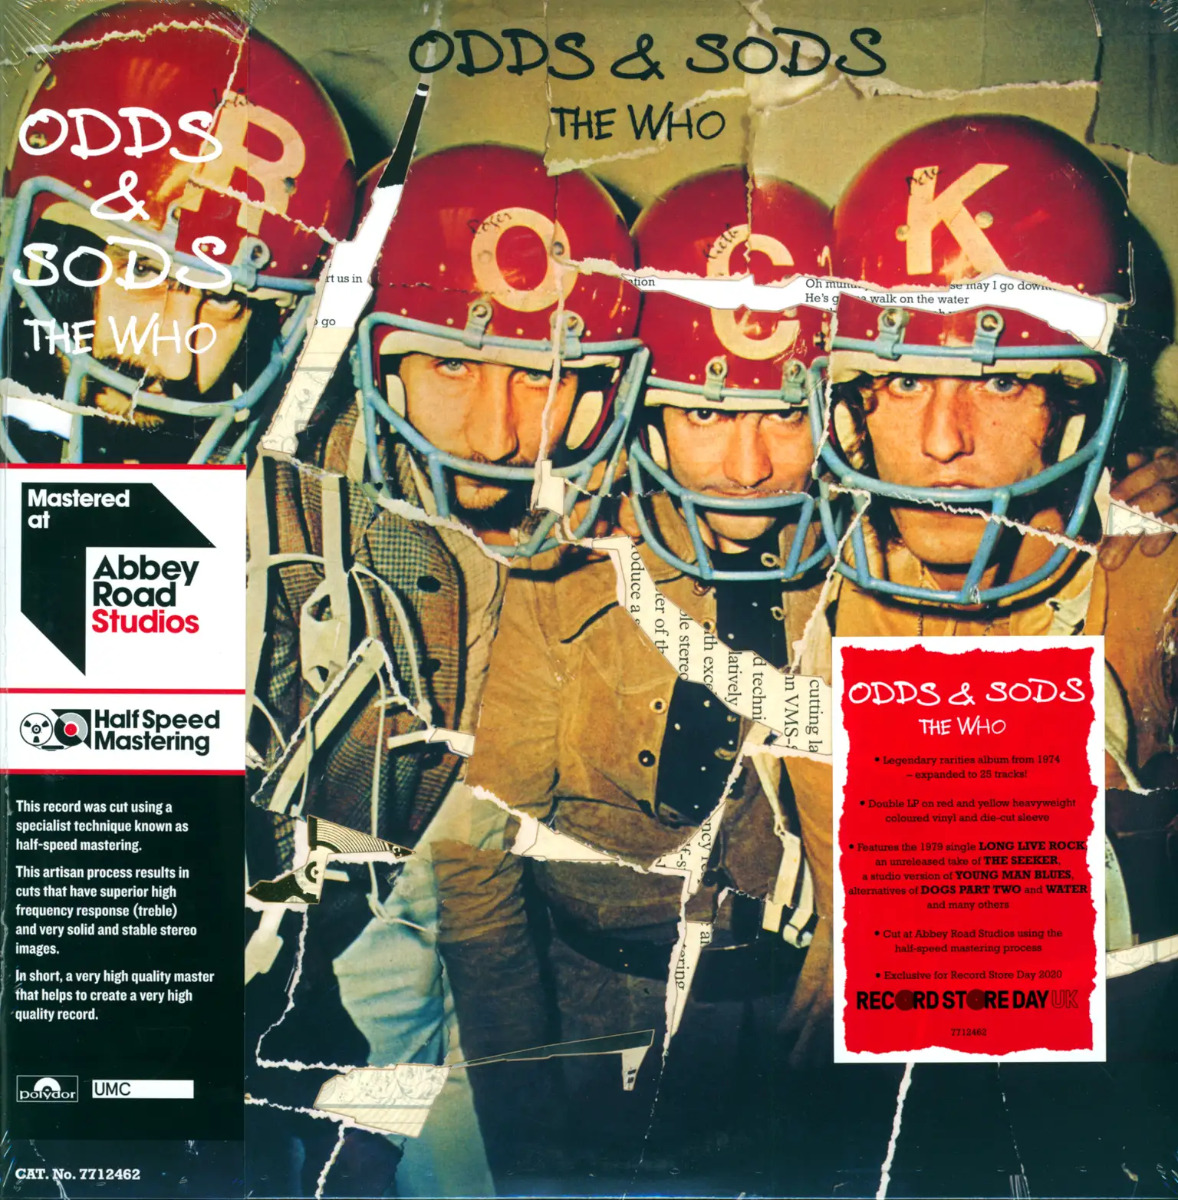 The Who - Odds & Sods (DOLP)